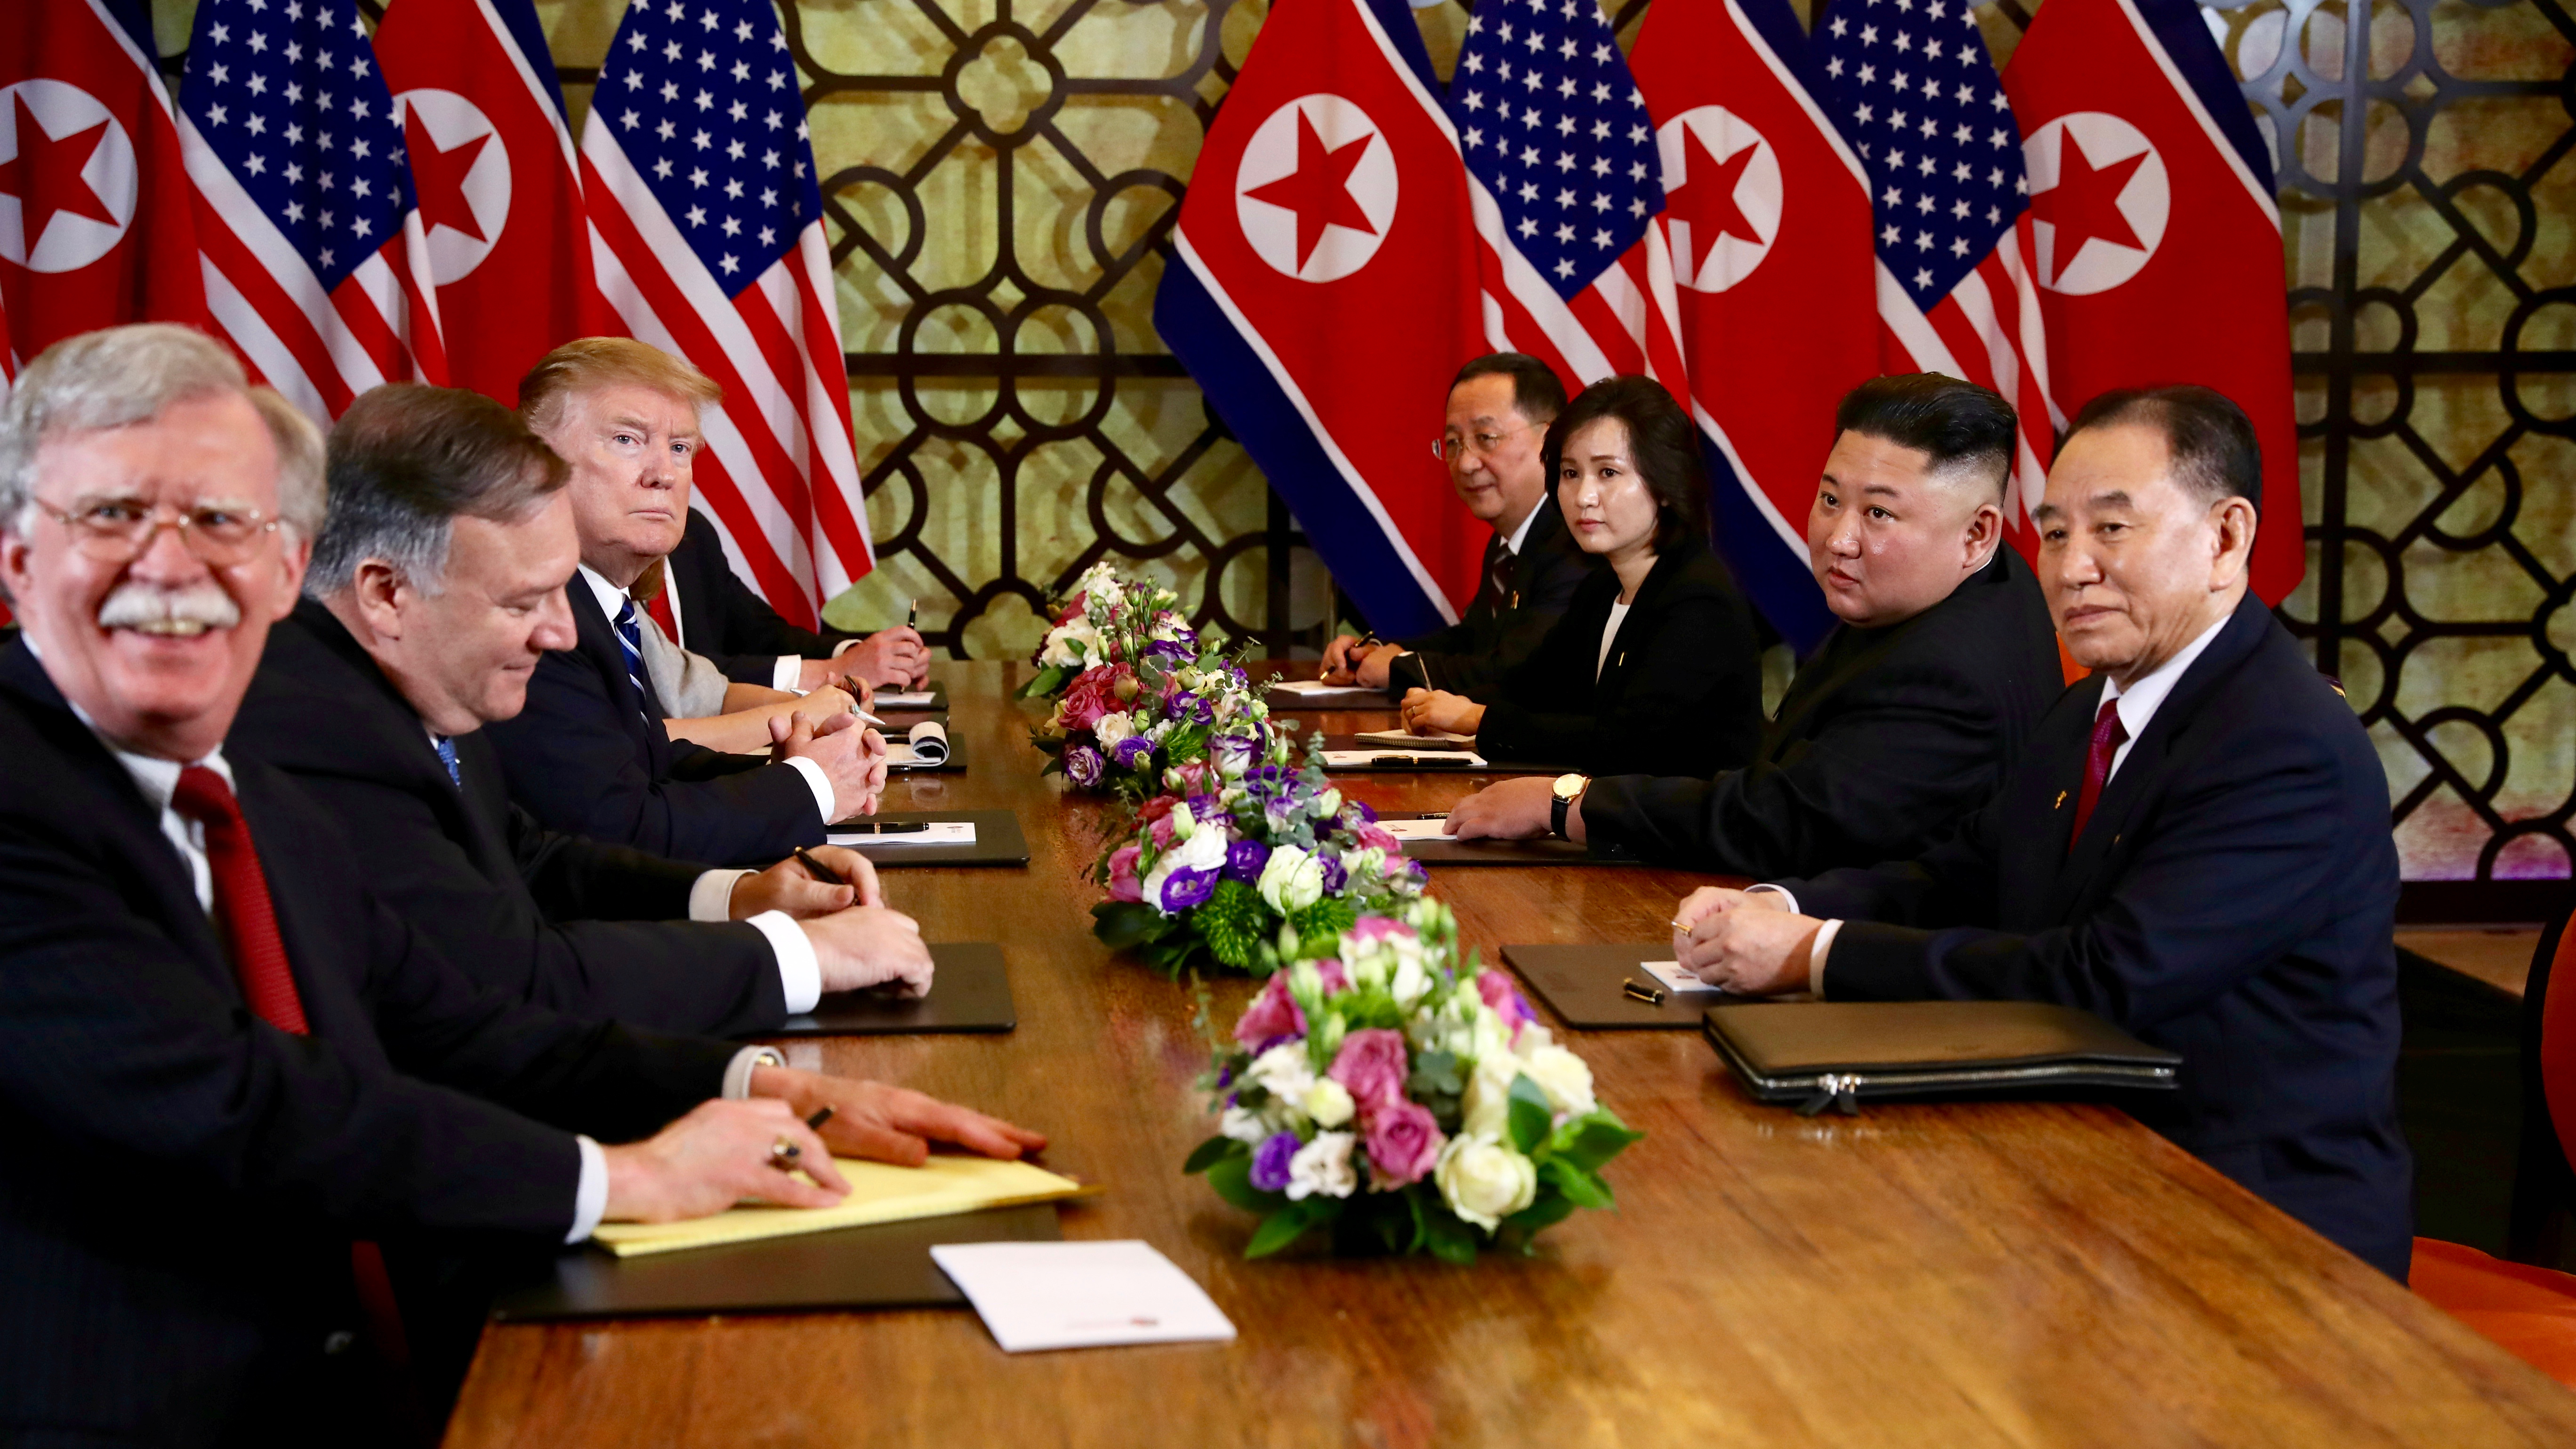 US President Donald Trump and North Korea's leader Kim Jong-un look on while White House national security adviser John Bolton reacts during the extended bilateral meeting in the Metropole Hotel alongside US Secretary of State Mike Pompeo, North Korean Fo